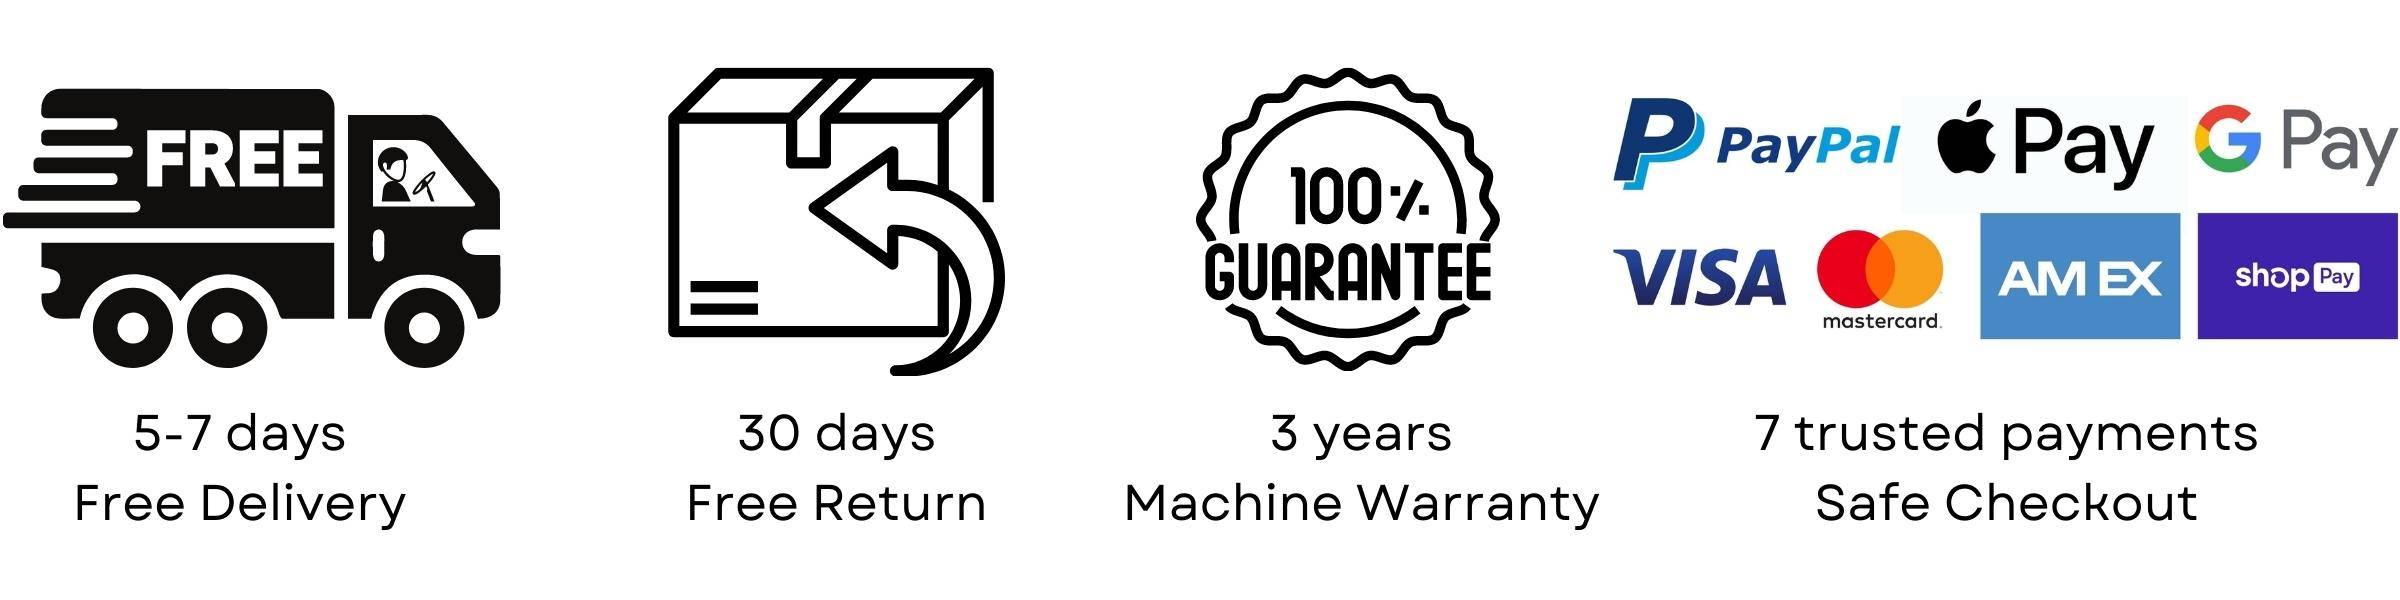  Free shipping in the United States 30-day return, 36-month machine, 7-year cutter warranty Guaranteed safe checkout with Paypal and other trusted payments Specialized in manufacturing paper shredders since 2005